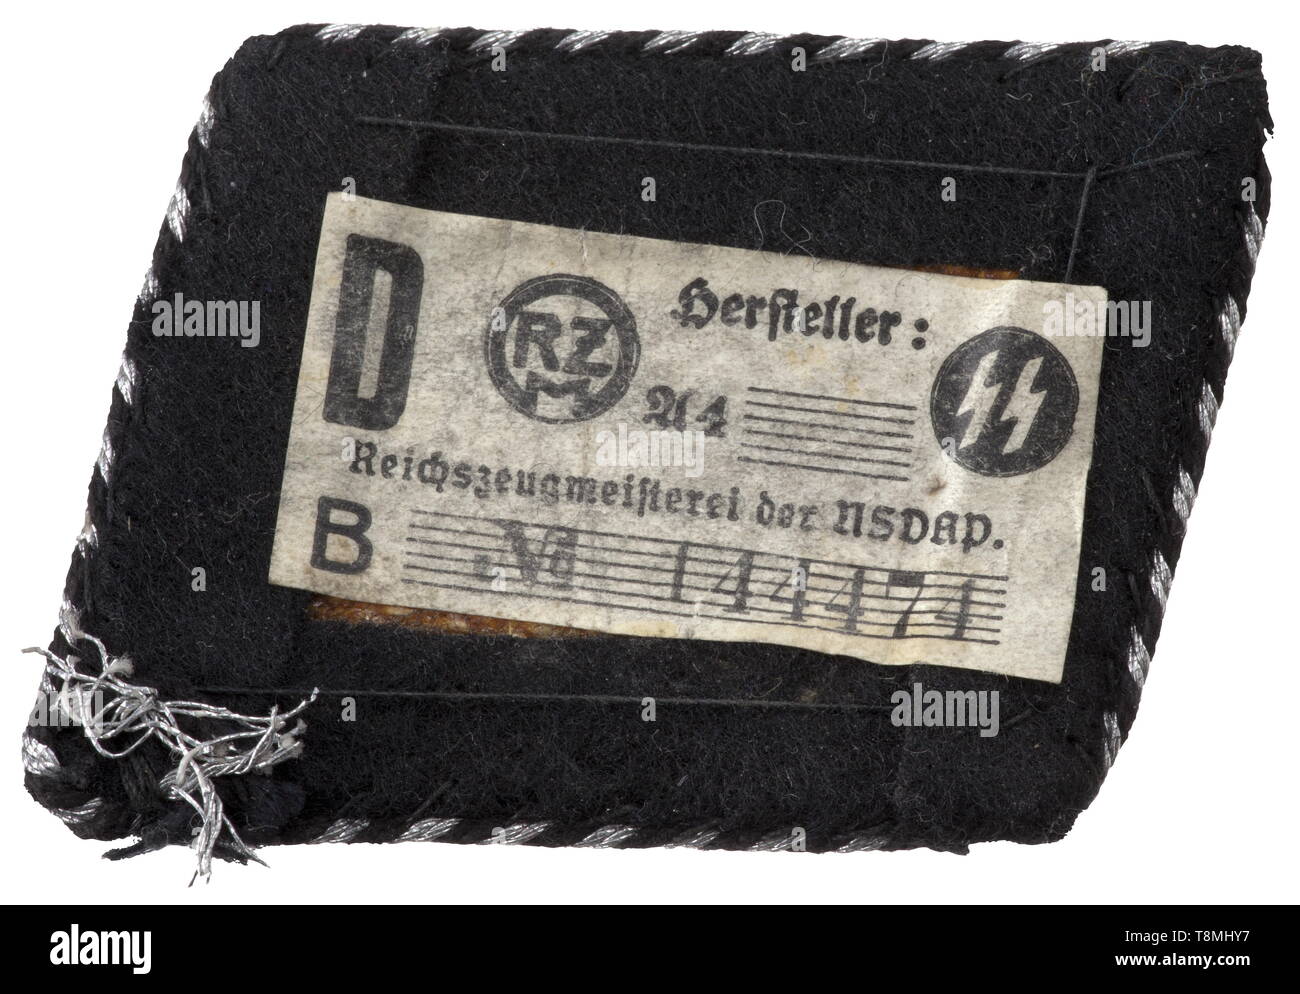 A collar patch for an SS leader of the 3rd SS-Standarte 'Der Führer' Hand-embroidered '3' and SS runes in silver wire thread, continuous black-silver corded trim, the reverse with an SS/RZM-paper tag. historic, historical, 20th century, 1930s, 1940s, Waffen-SS, armed division of the SS, armed service, armed services, NS, National Socialism, Nazism, Third Reich, German Reich, Germany, military, militaria, utensil, piece of equipment, utensils, object, objects, stills, clipping, clippings, cut out, cut-out, cut-outs, fascism, fascistic, National Socialist, Nazi, Nazi period, Editorial-Use-Only Stock Photo